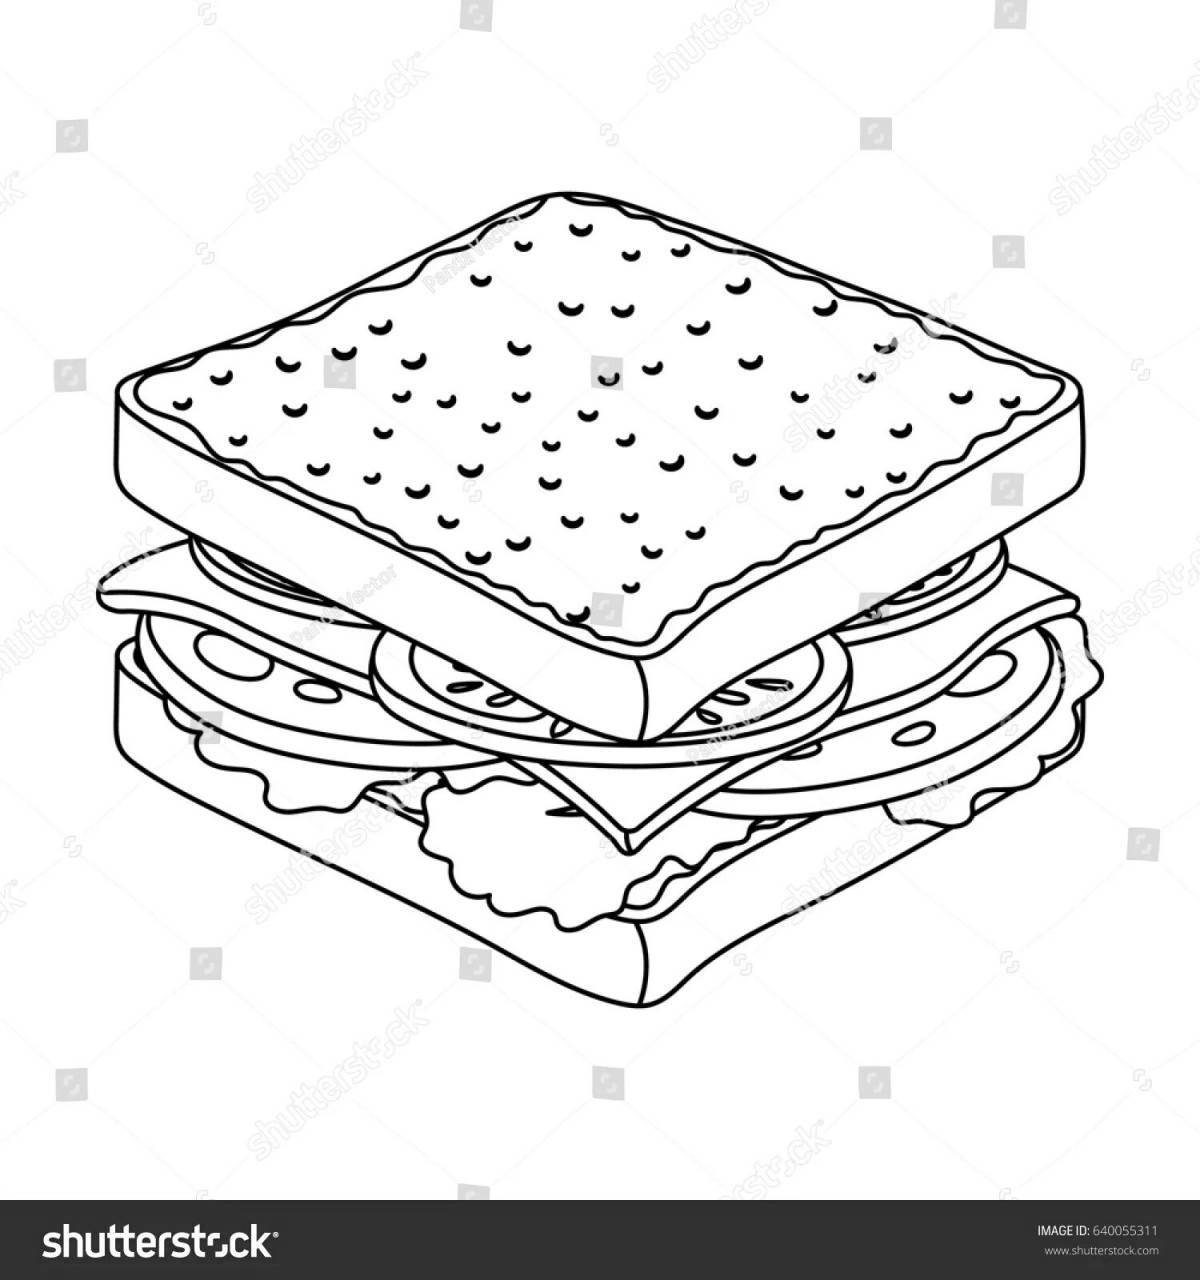 Vibrant coloring of sandwiches for children